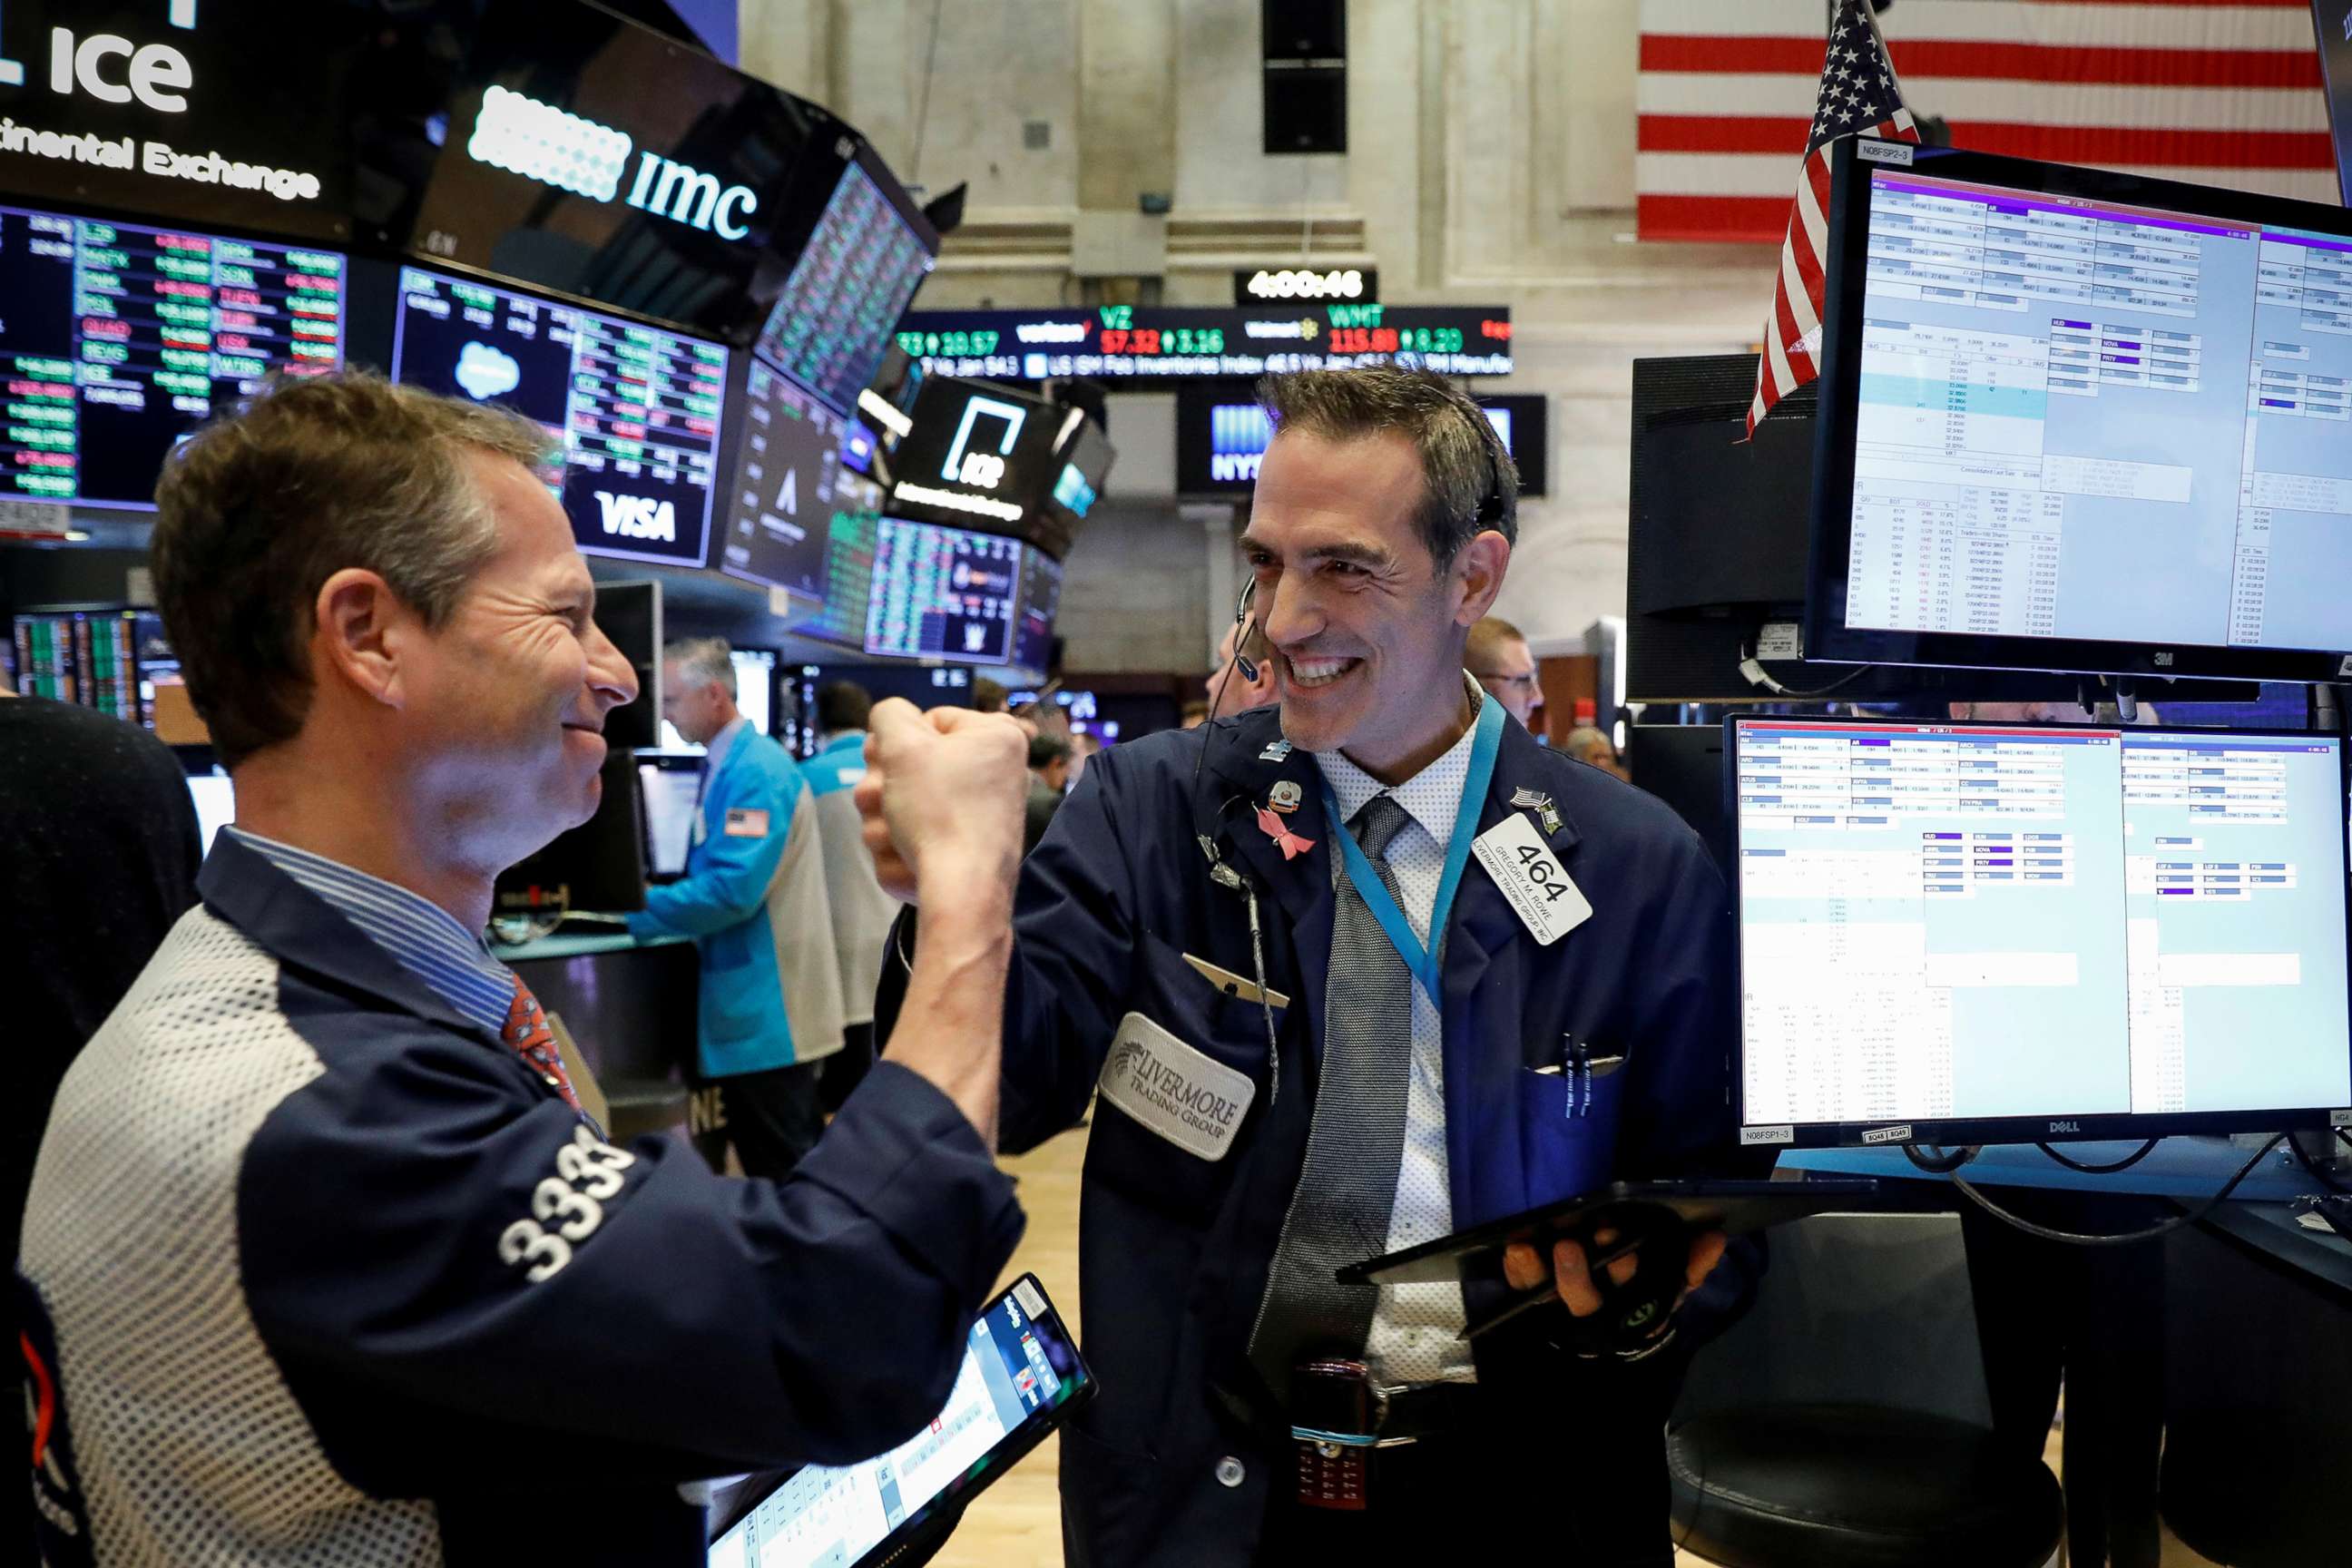 PHOTO: Traders celebrate as they work on the floor at the New York Stock Exchange in New York, March 2, 2020.